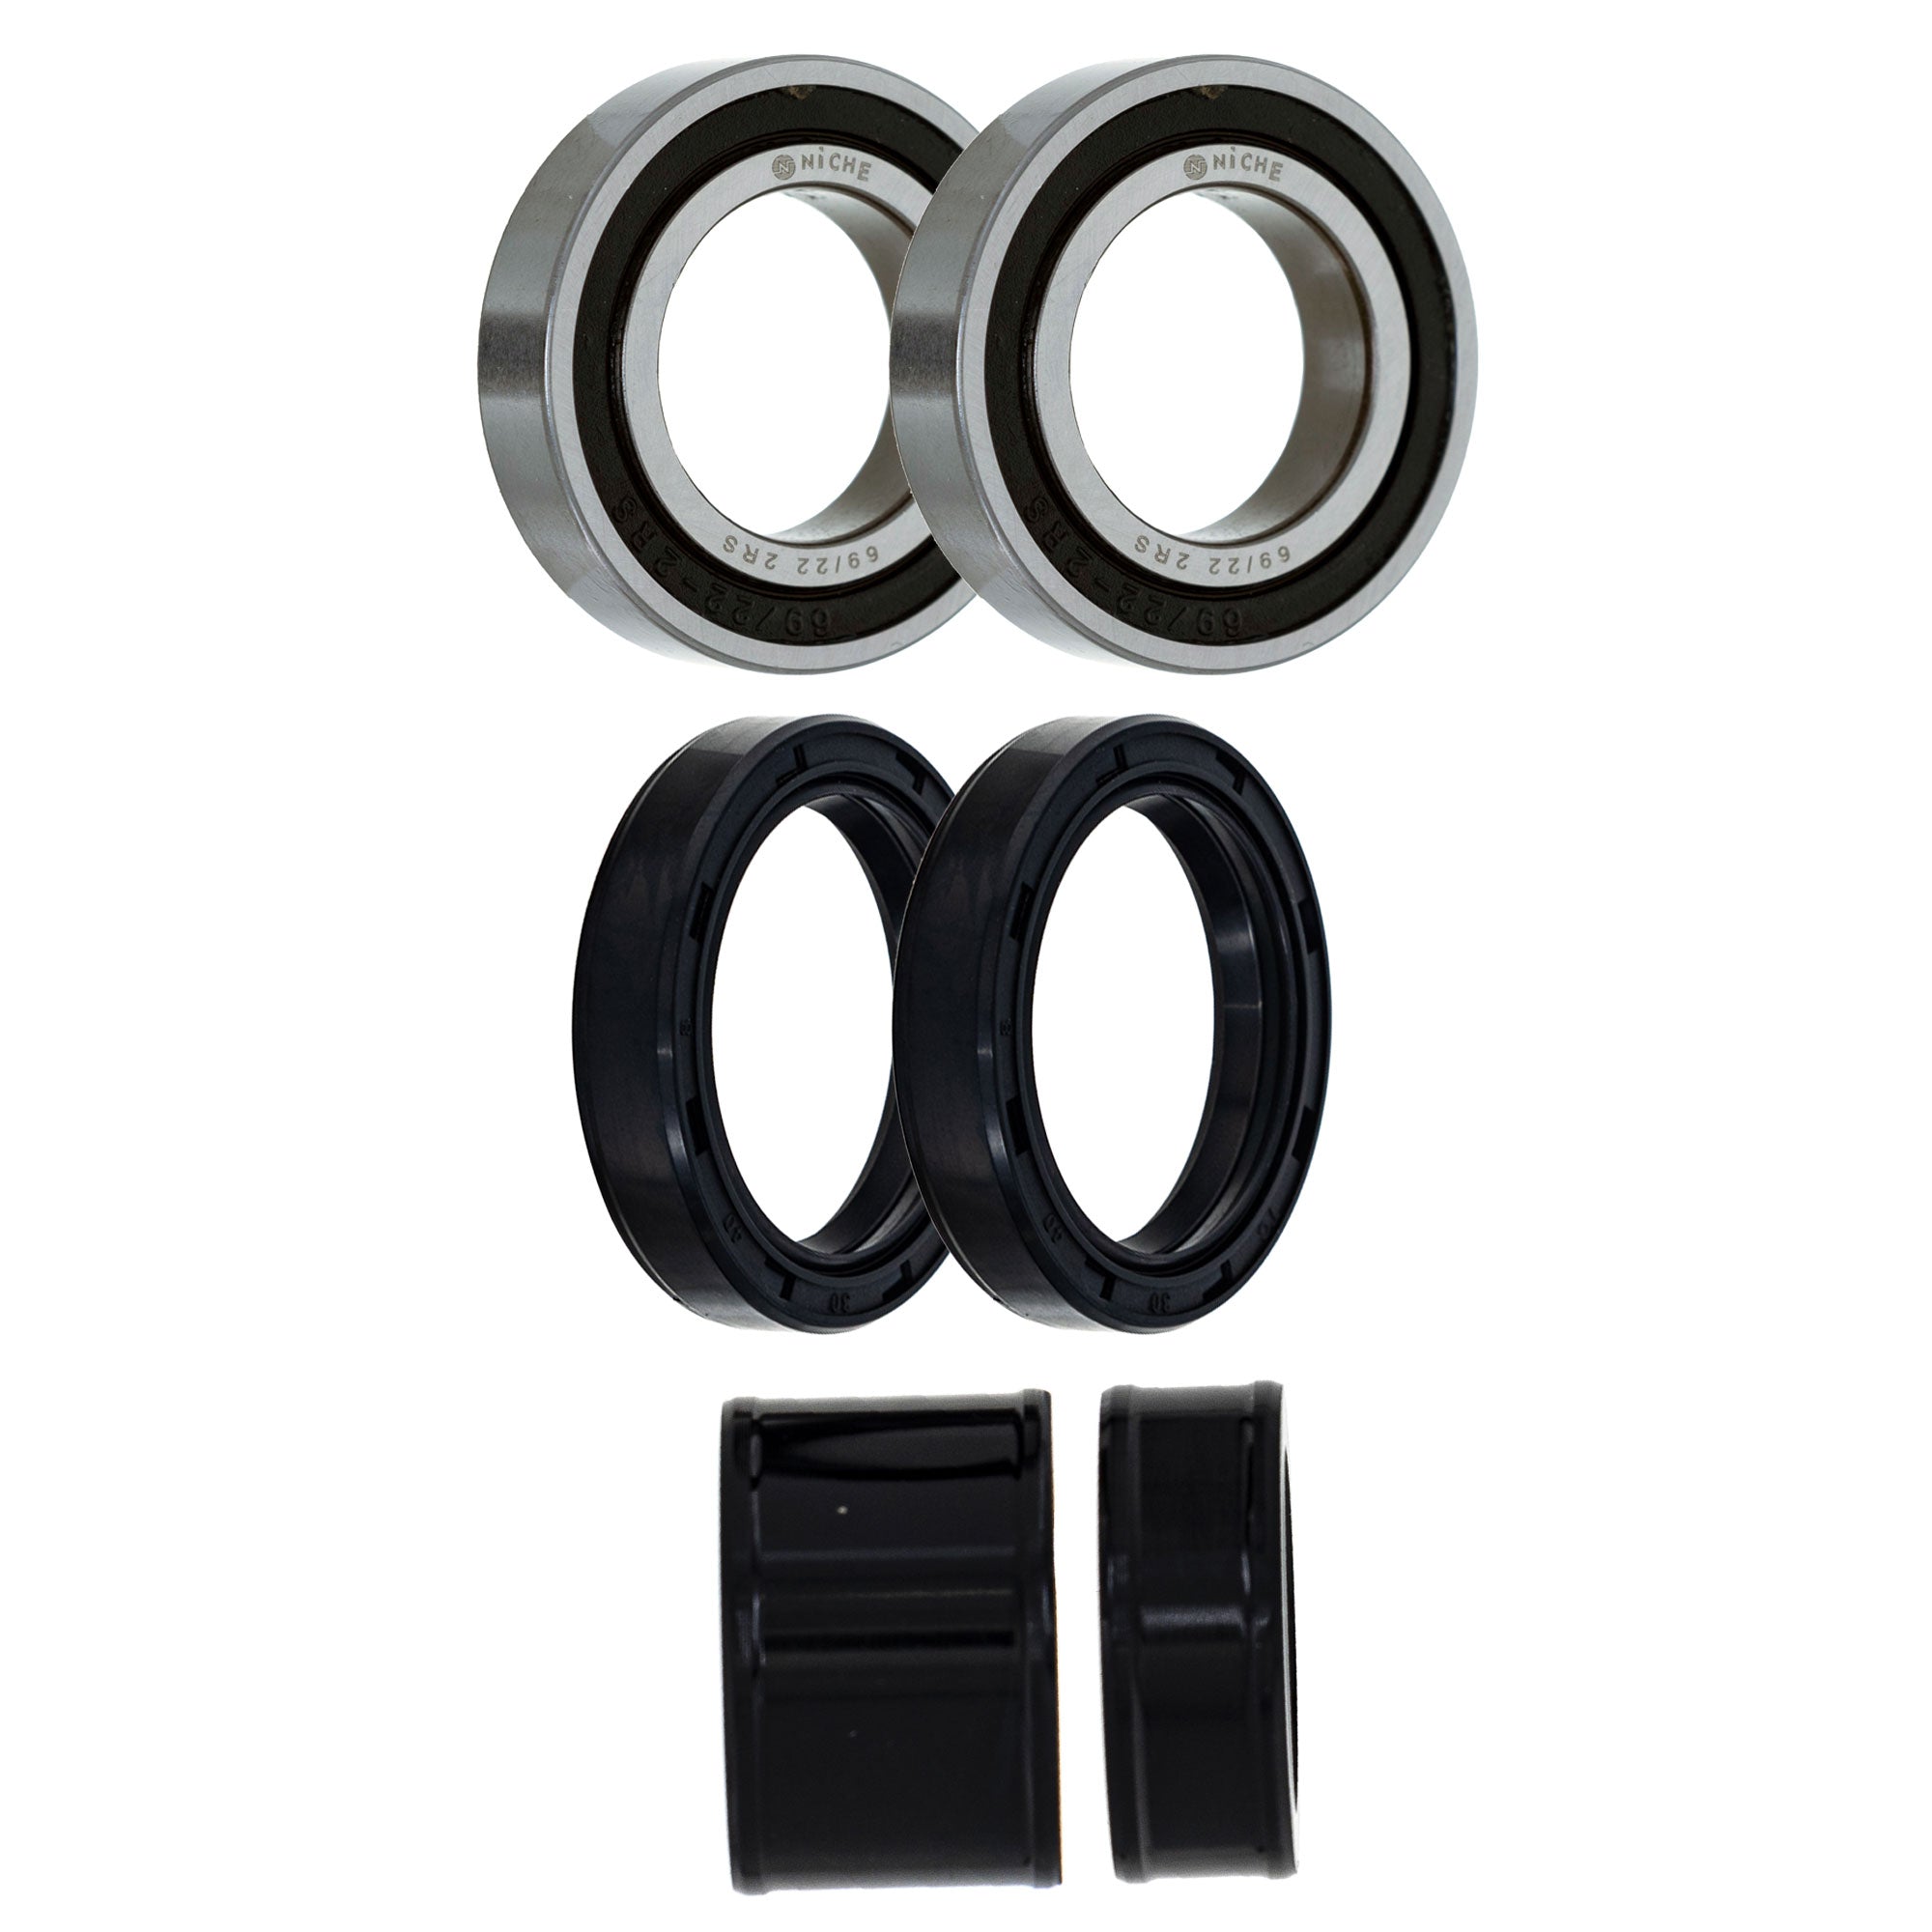 Wheel Bearing Spacer Seal Kit for zOTHER YZ450FX YZ450F YZ250FX YZ250F NICHE MK1009232